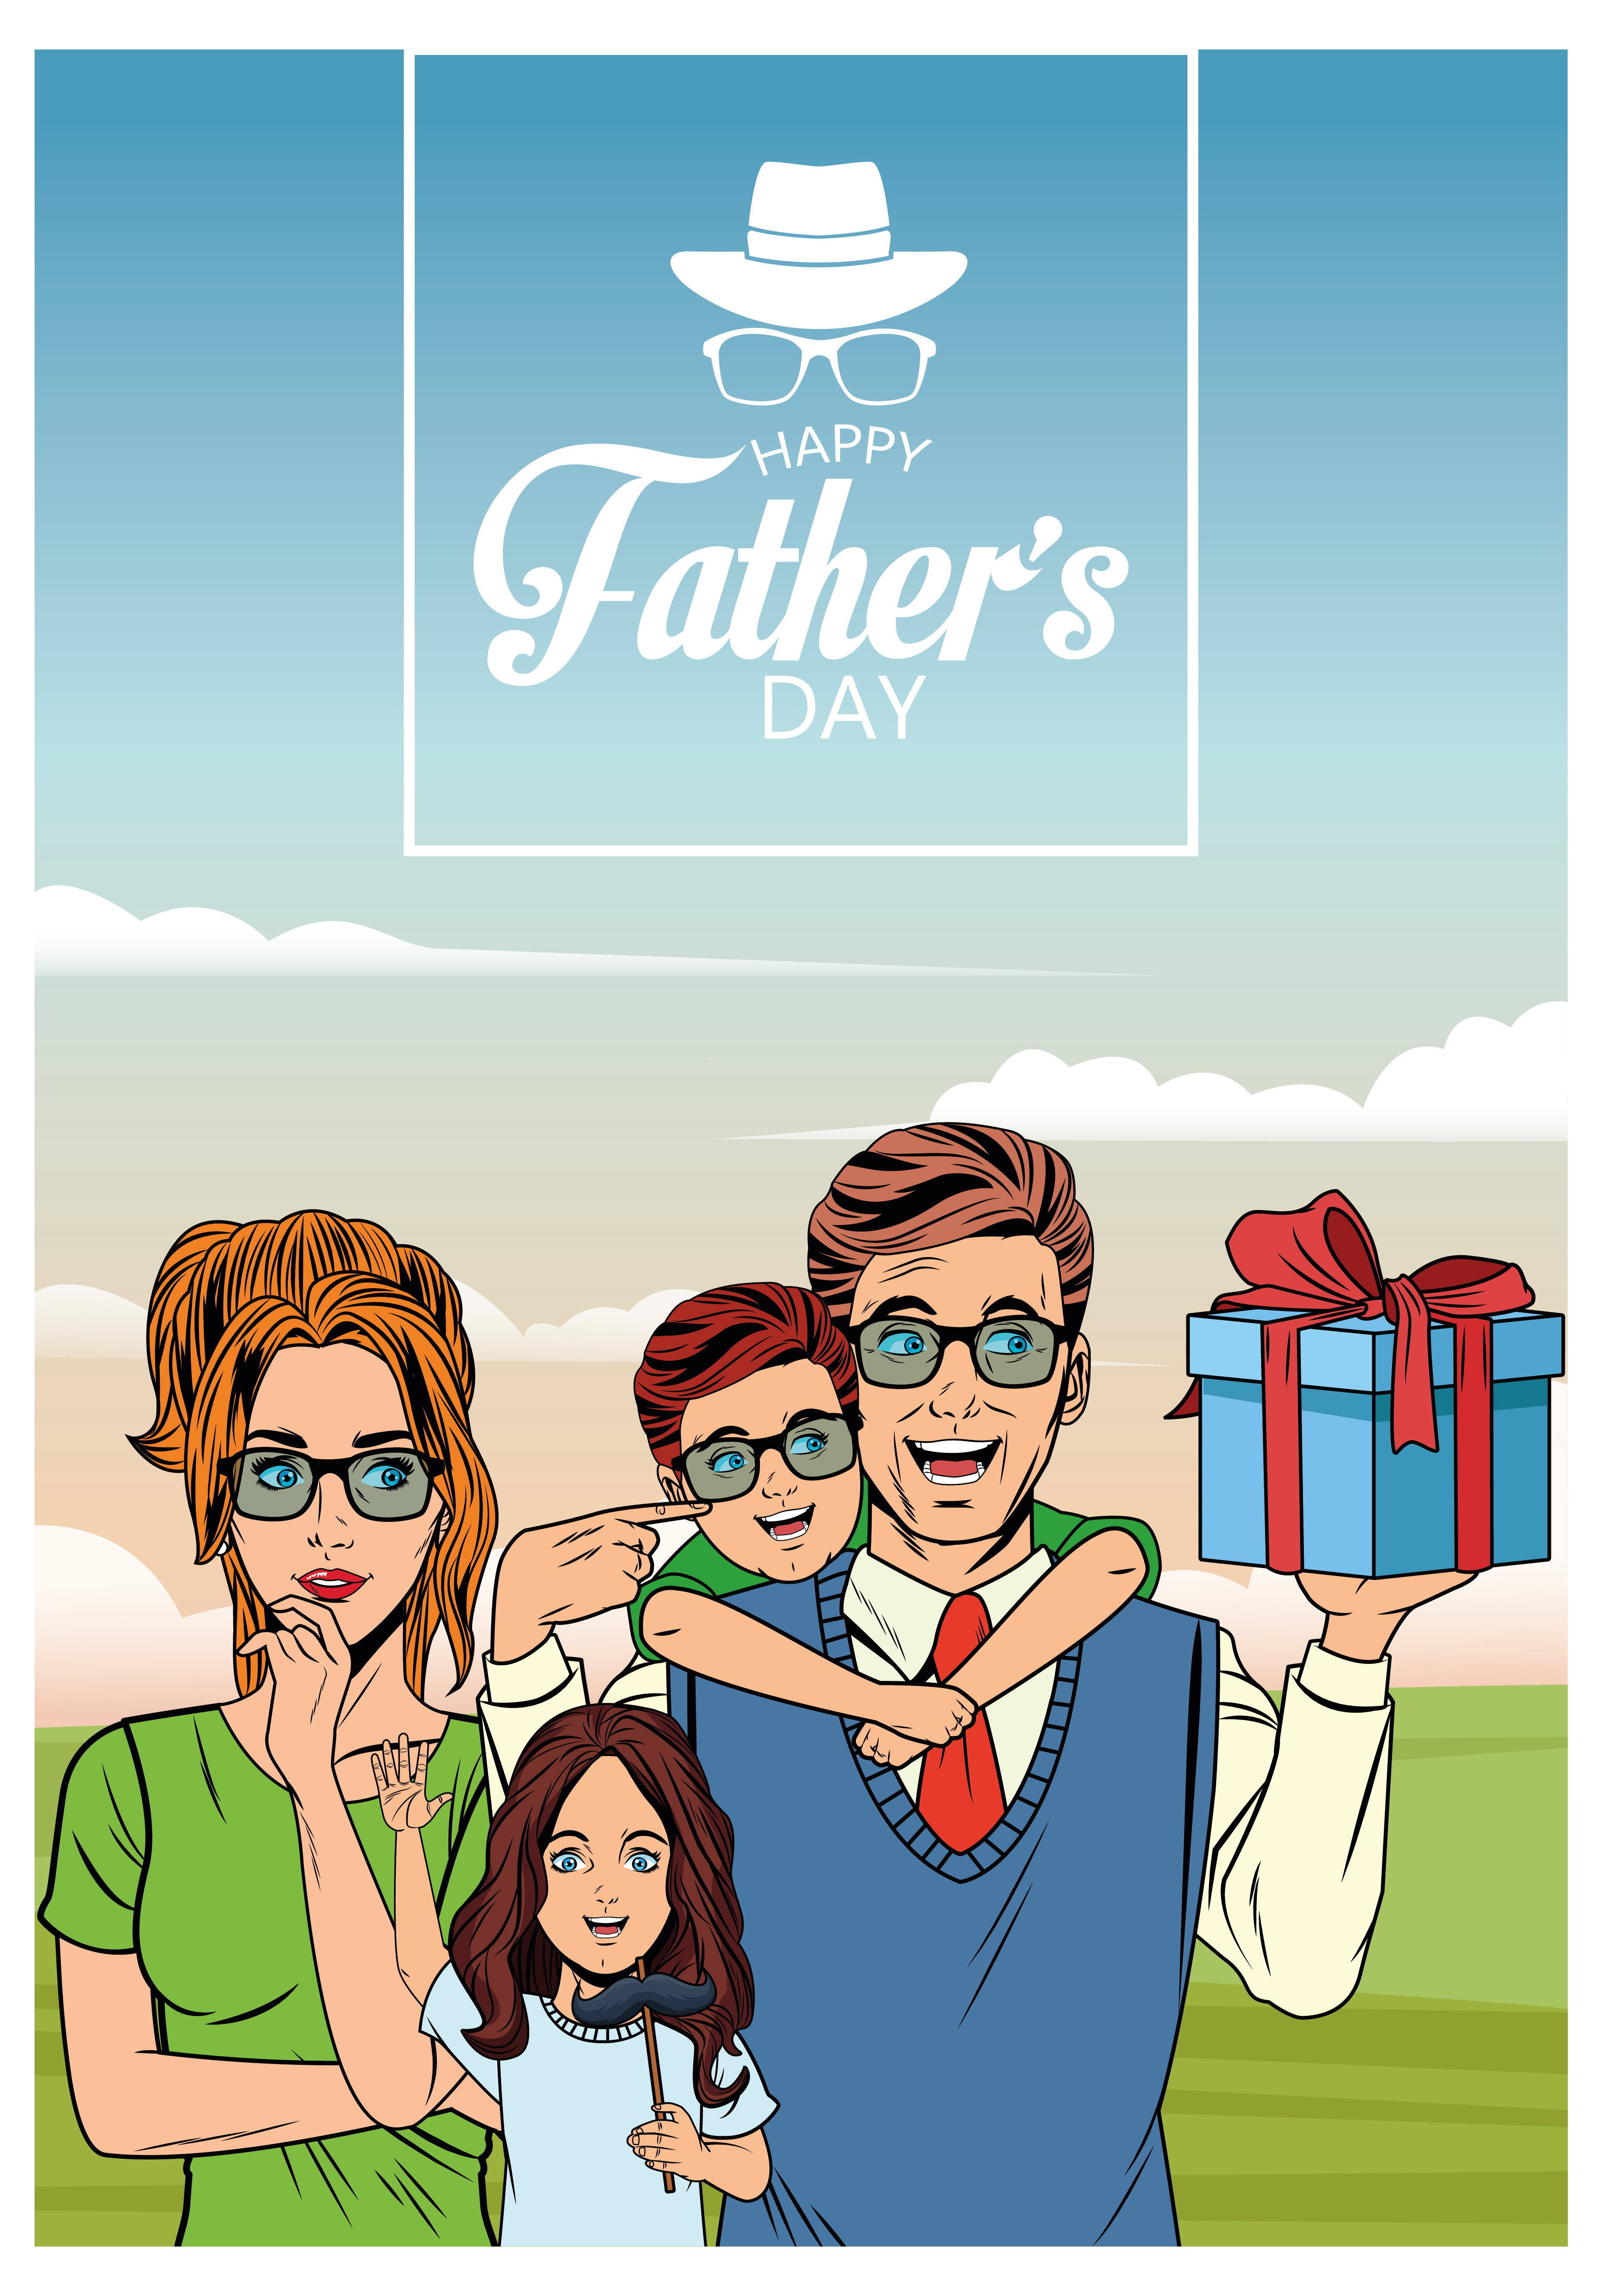 Download Happy fathers day card - Download Free Vectors, Clipart Graphics & Vector Art